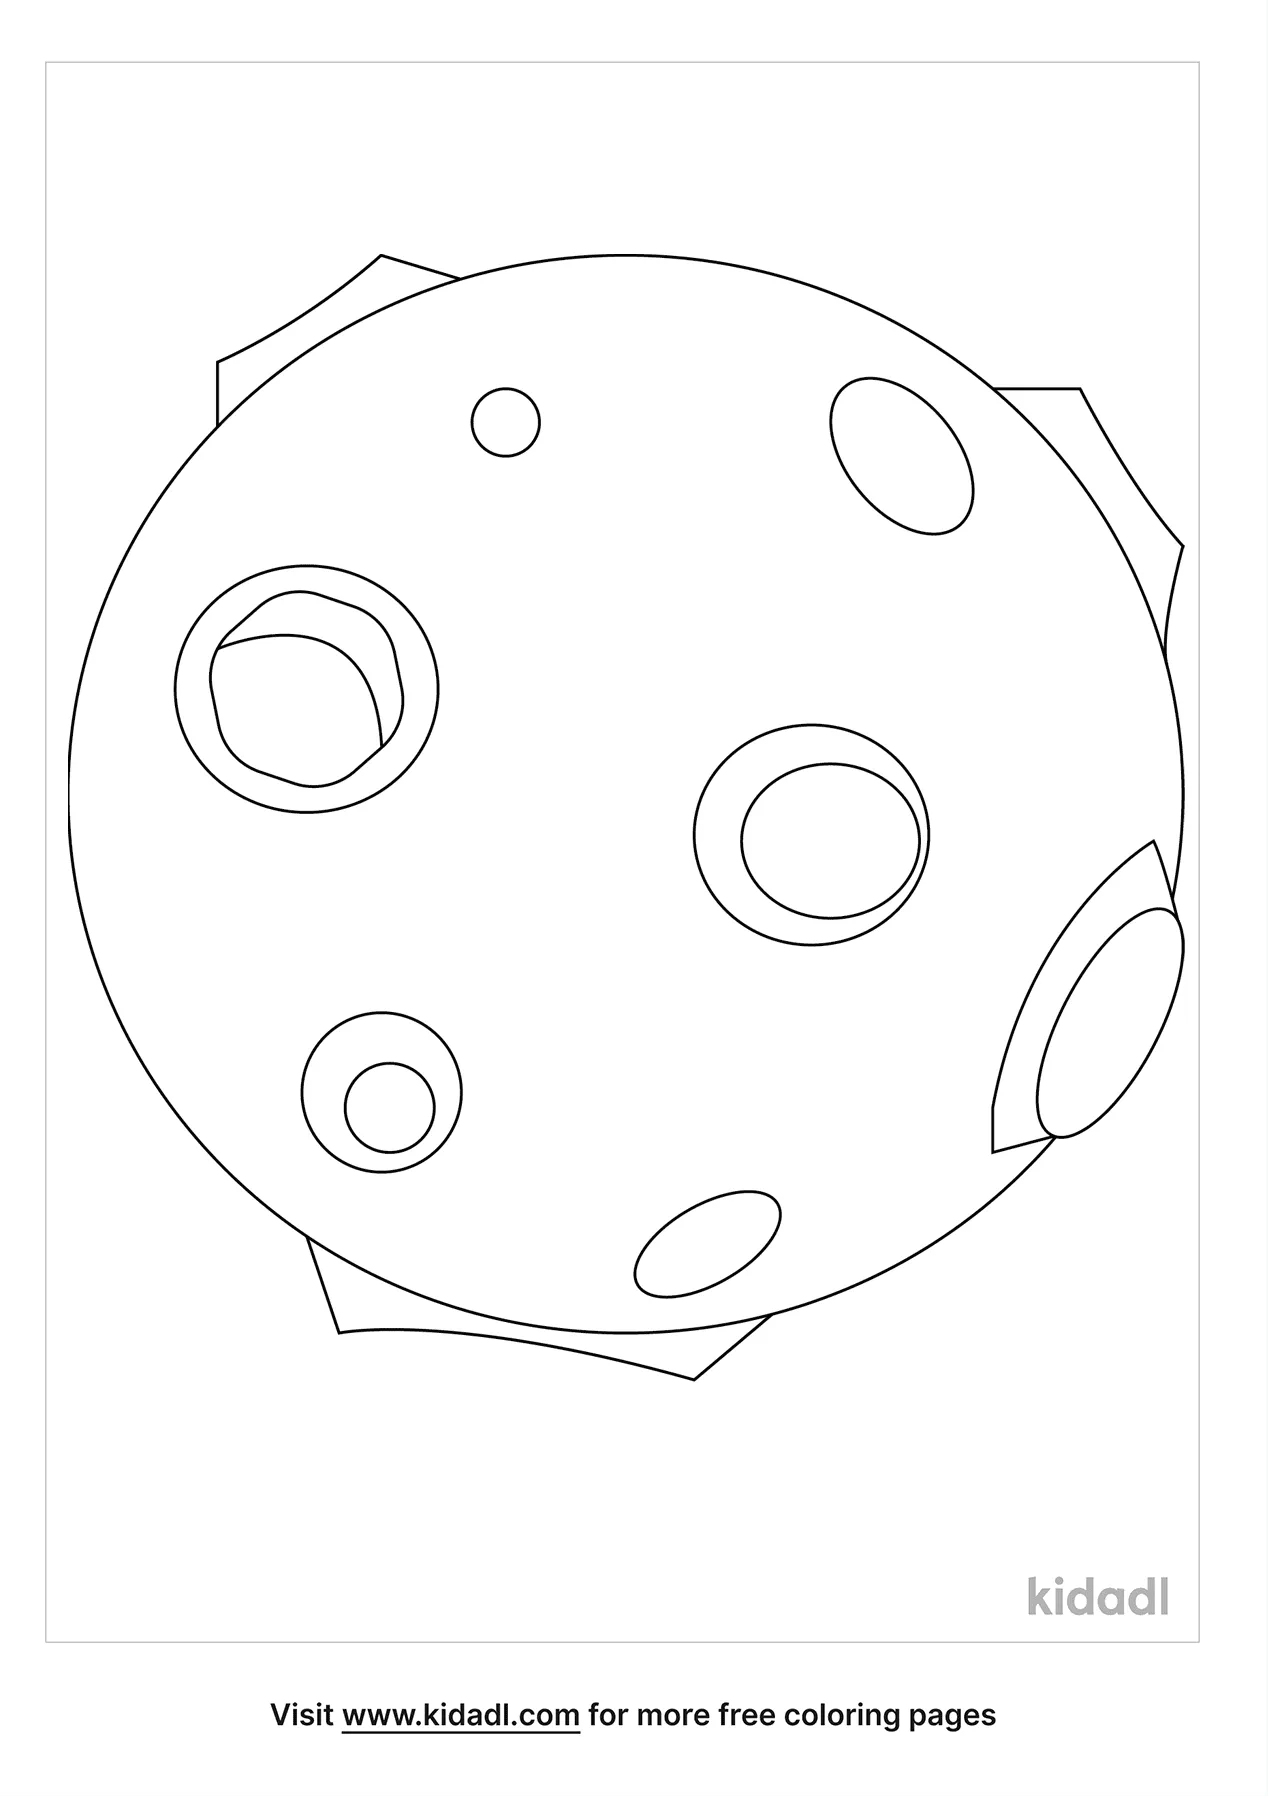 Full Moon With Craters Coloring Page